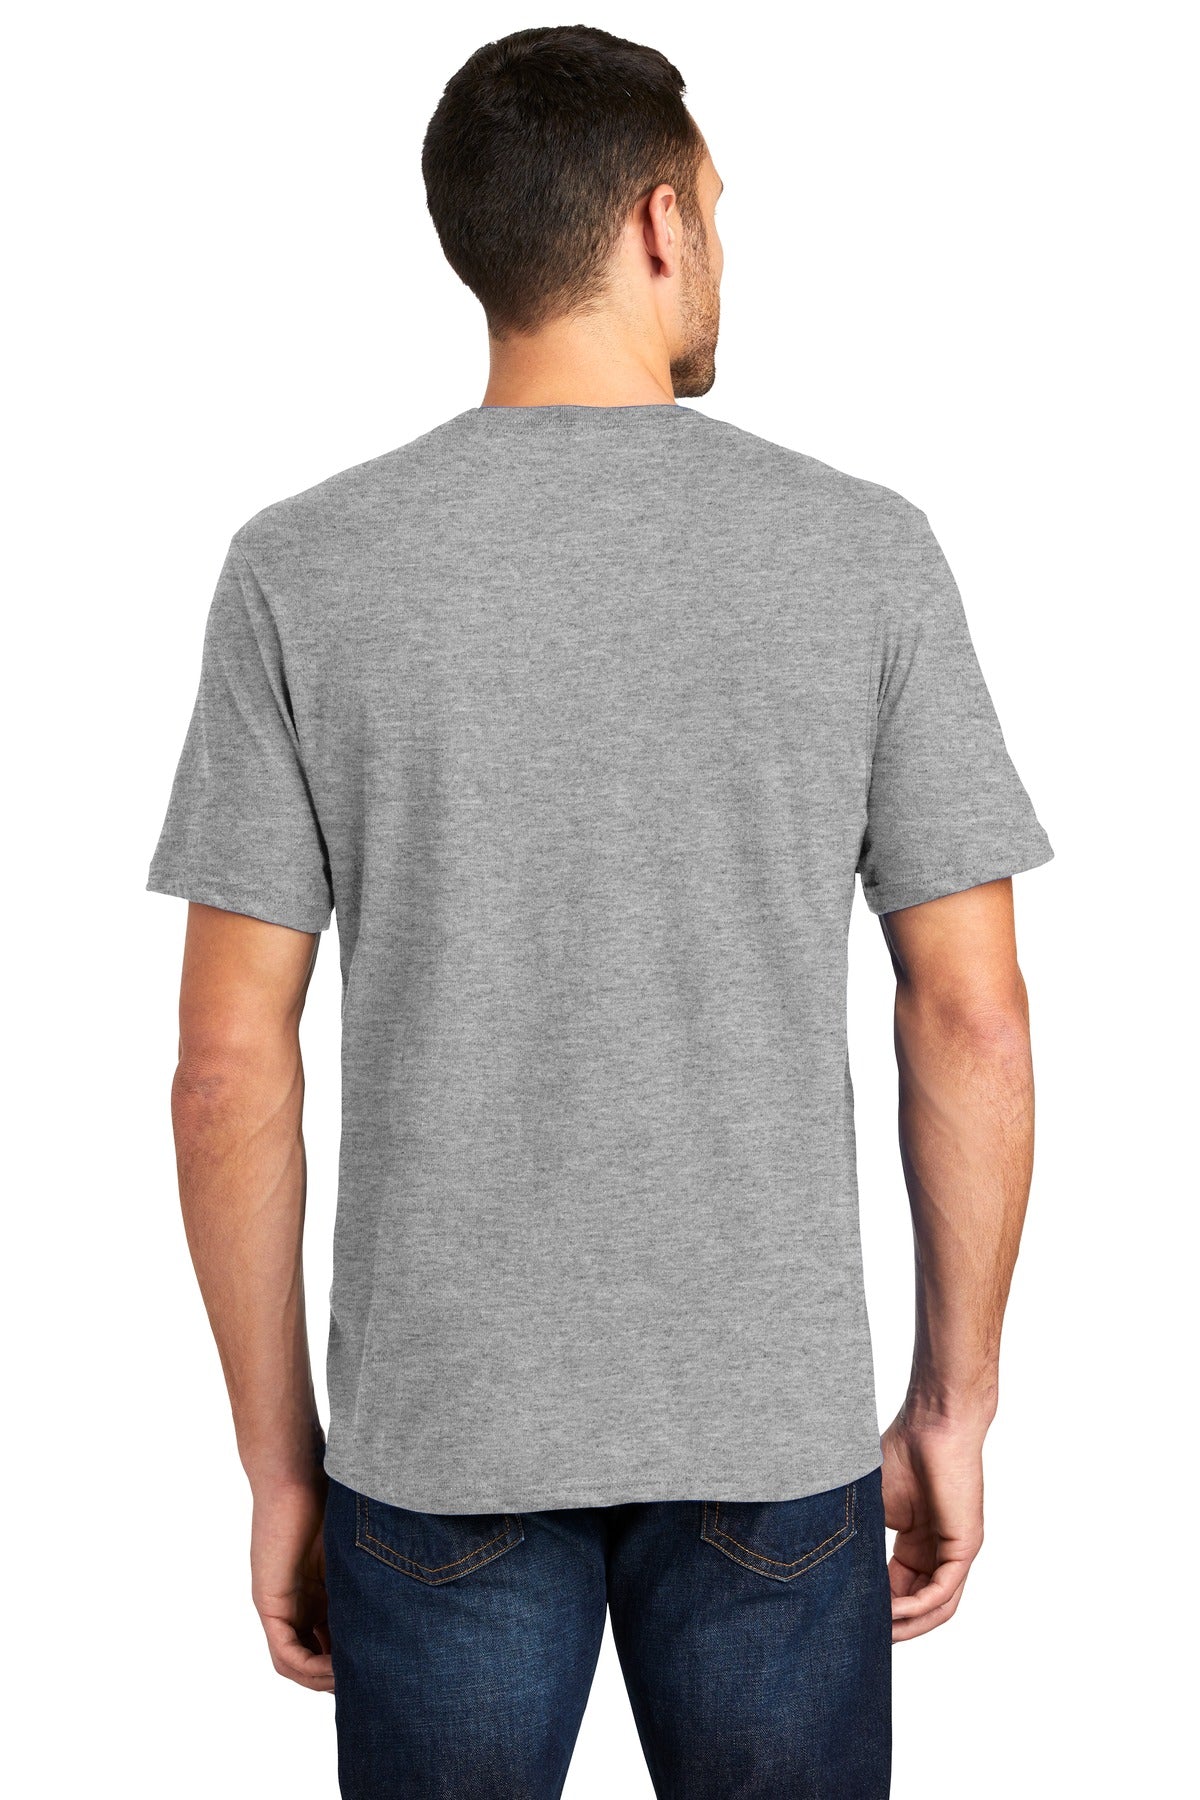 District® Very Important Tee®. DT6000 [Light Heather Grey] - DFW Impression